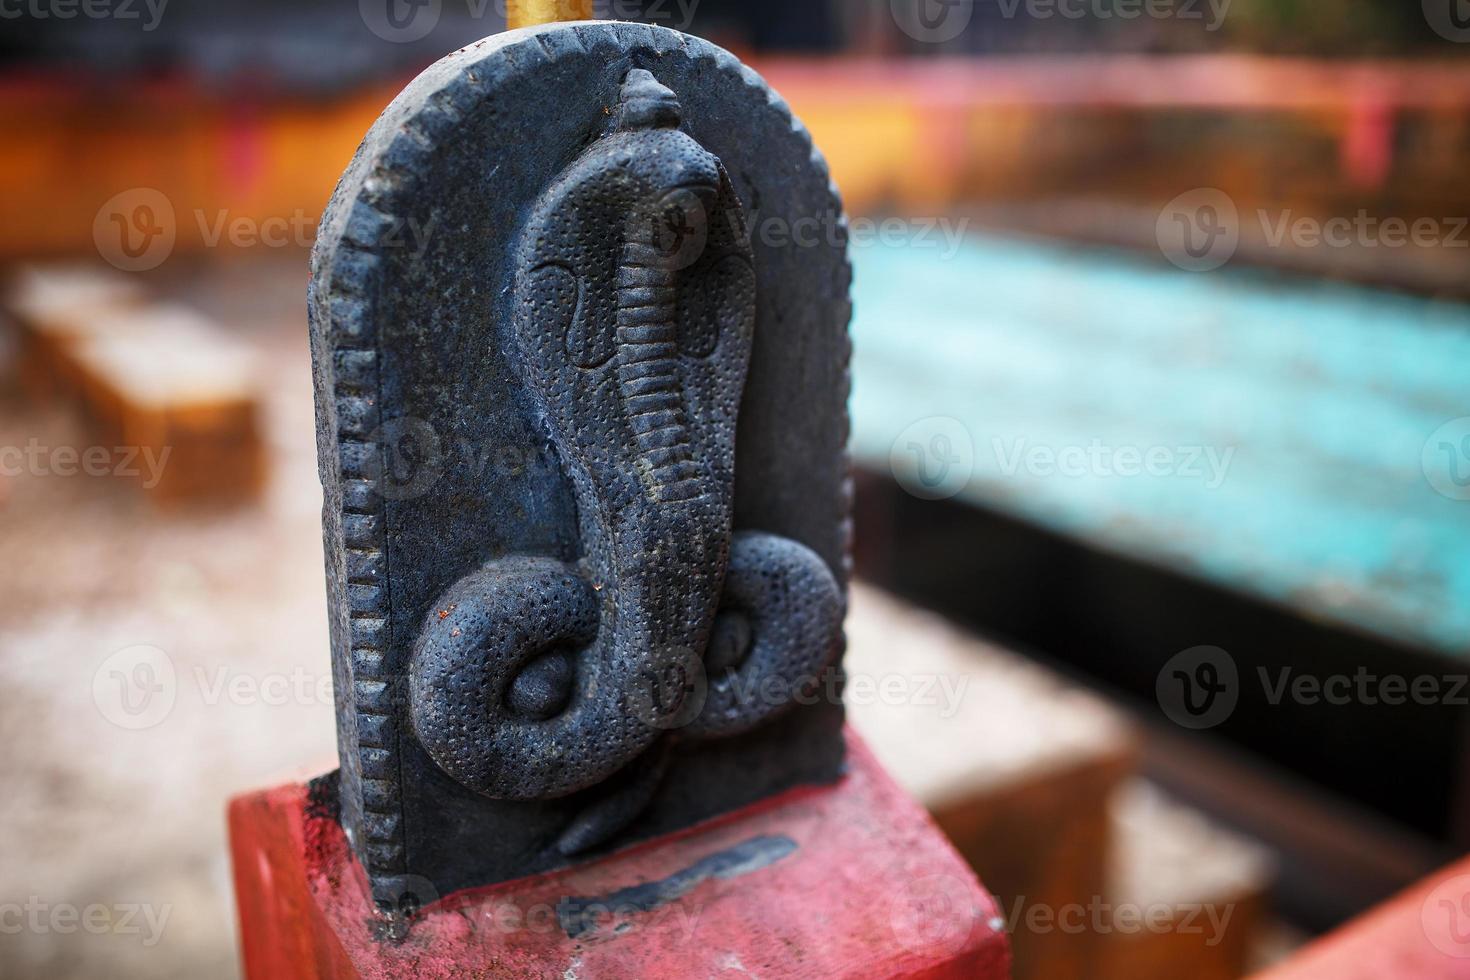 A small statue of the Snake, the temple of the serpent in India Gokarna photo